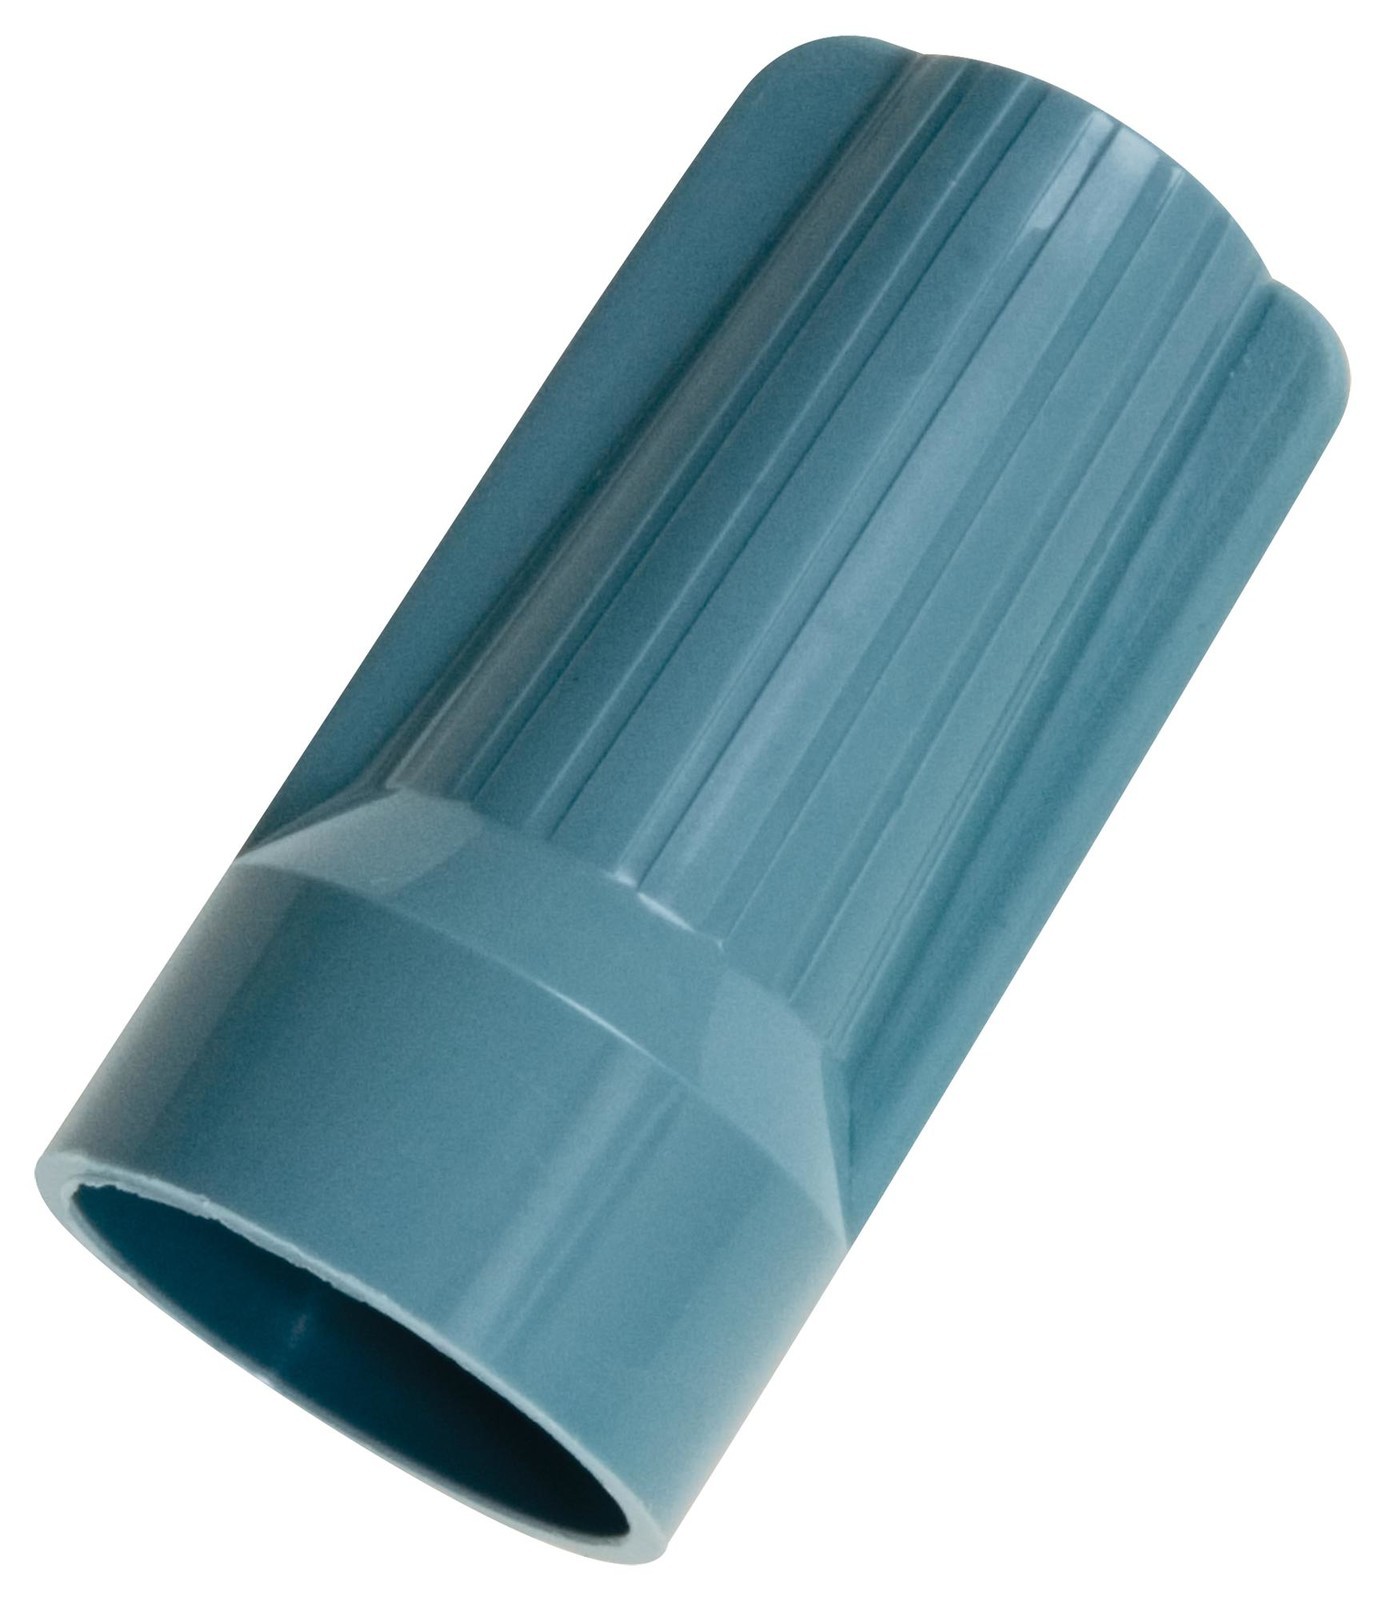 Ideal B4-1 Terminal, Connector, Twist On, Blue/gray